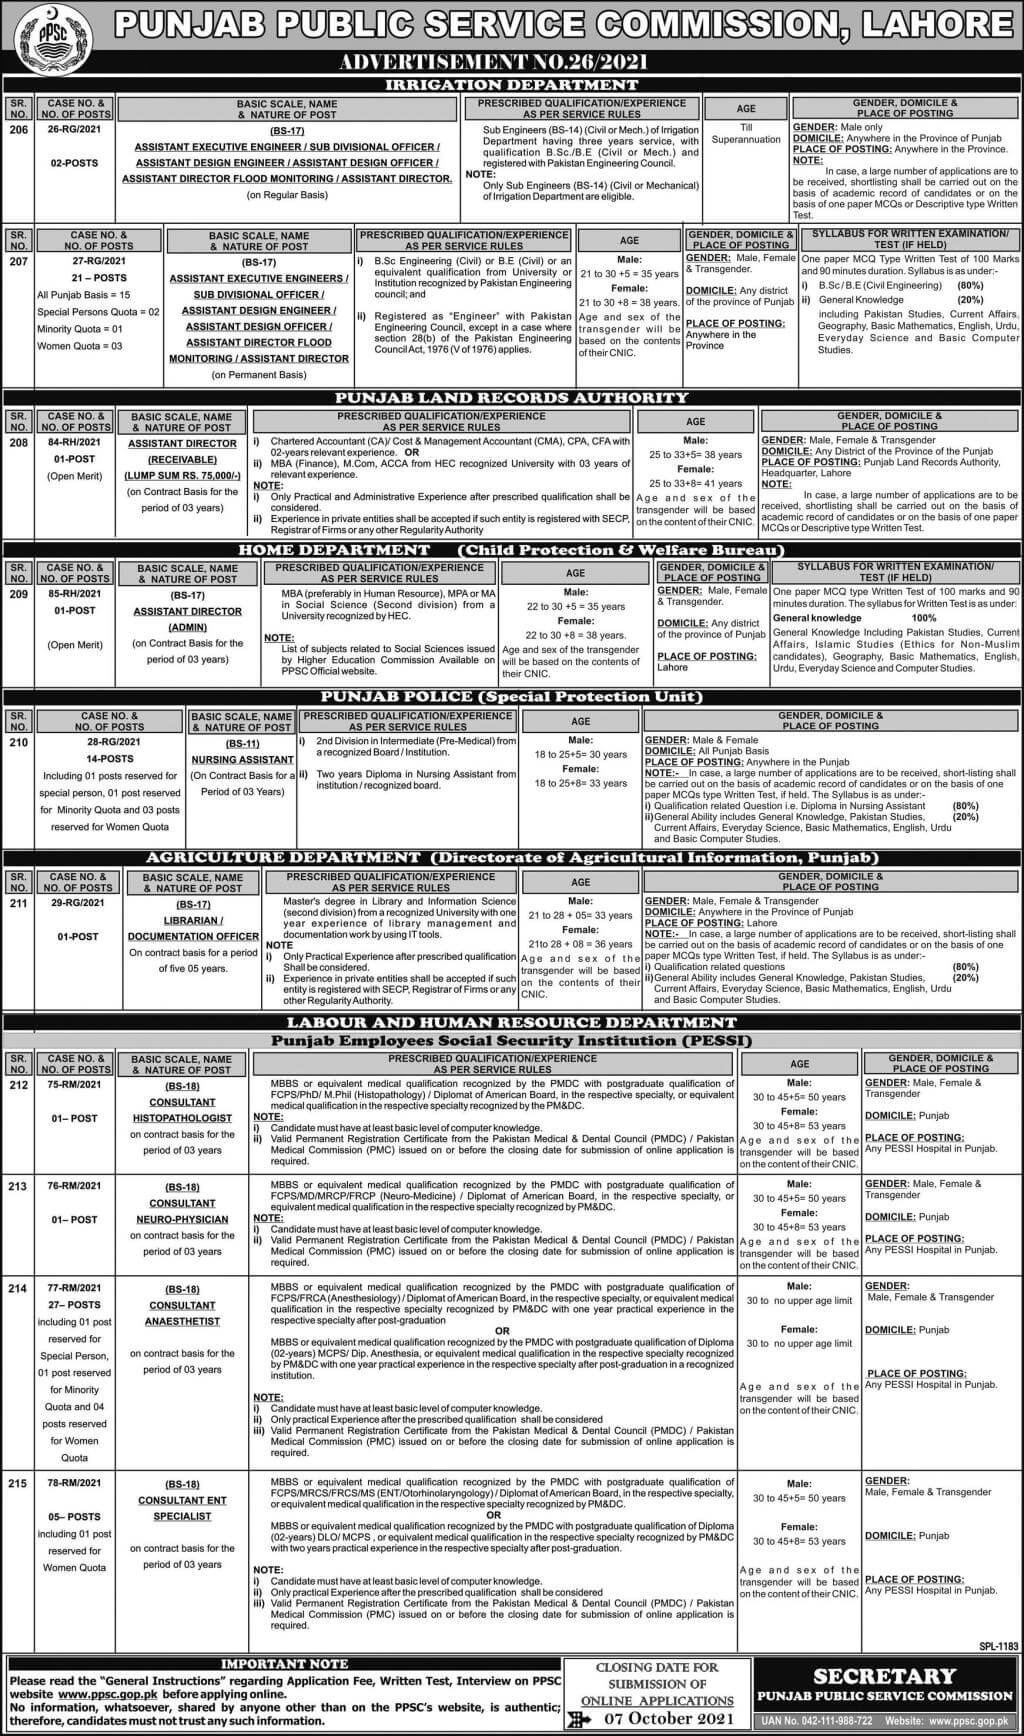 PPSC Jobs Today October 2021 At Punjab Public Service Commission